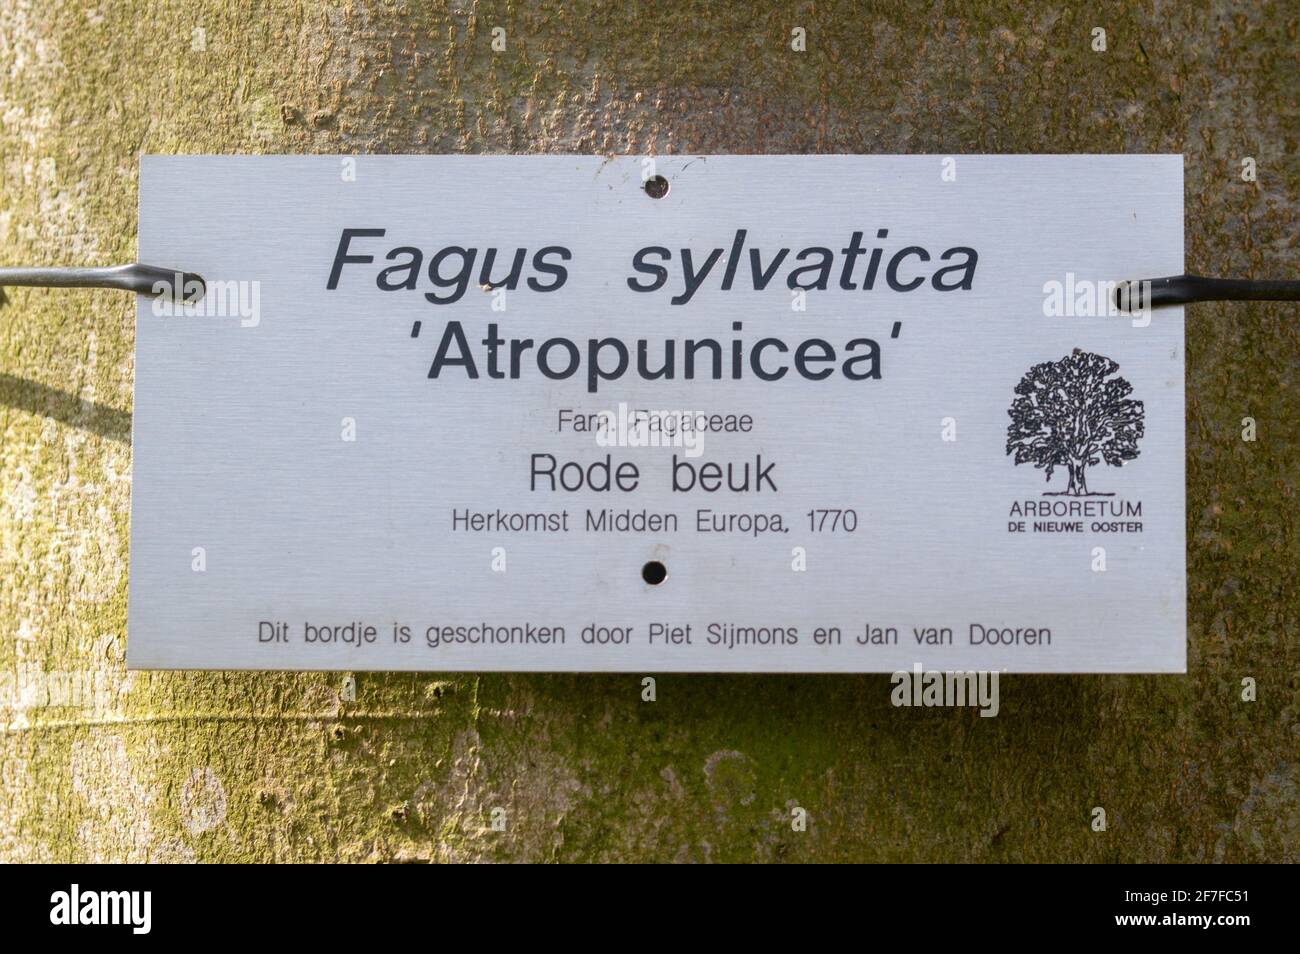 Sign Fagus Sylvatica Pendula Atropunicea At The Nieuwe Ooster Cemetery Amsterdam The Netherlands 26-3-2021 Stock Photo